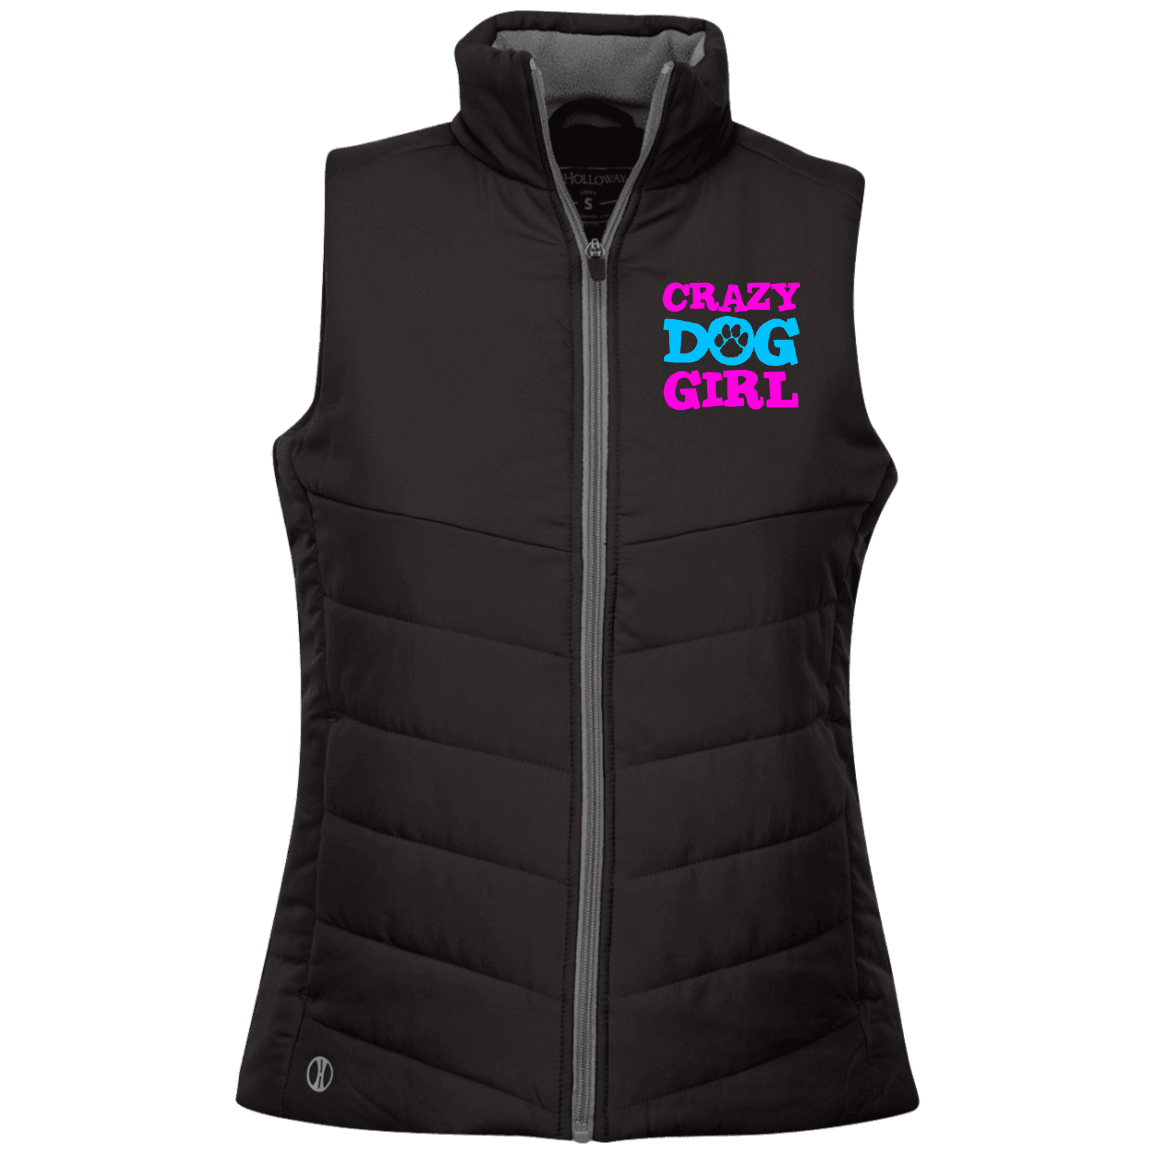 Designs by MyUtopia Shout Out:Crazy Dog Girl Embroidered Holloway Ladies' Quilted Vest,Black / X-Small,Jackets